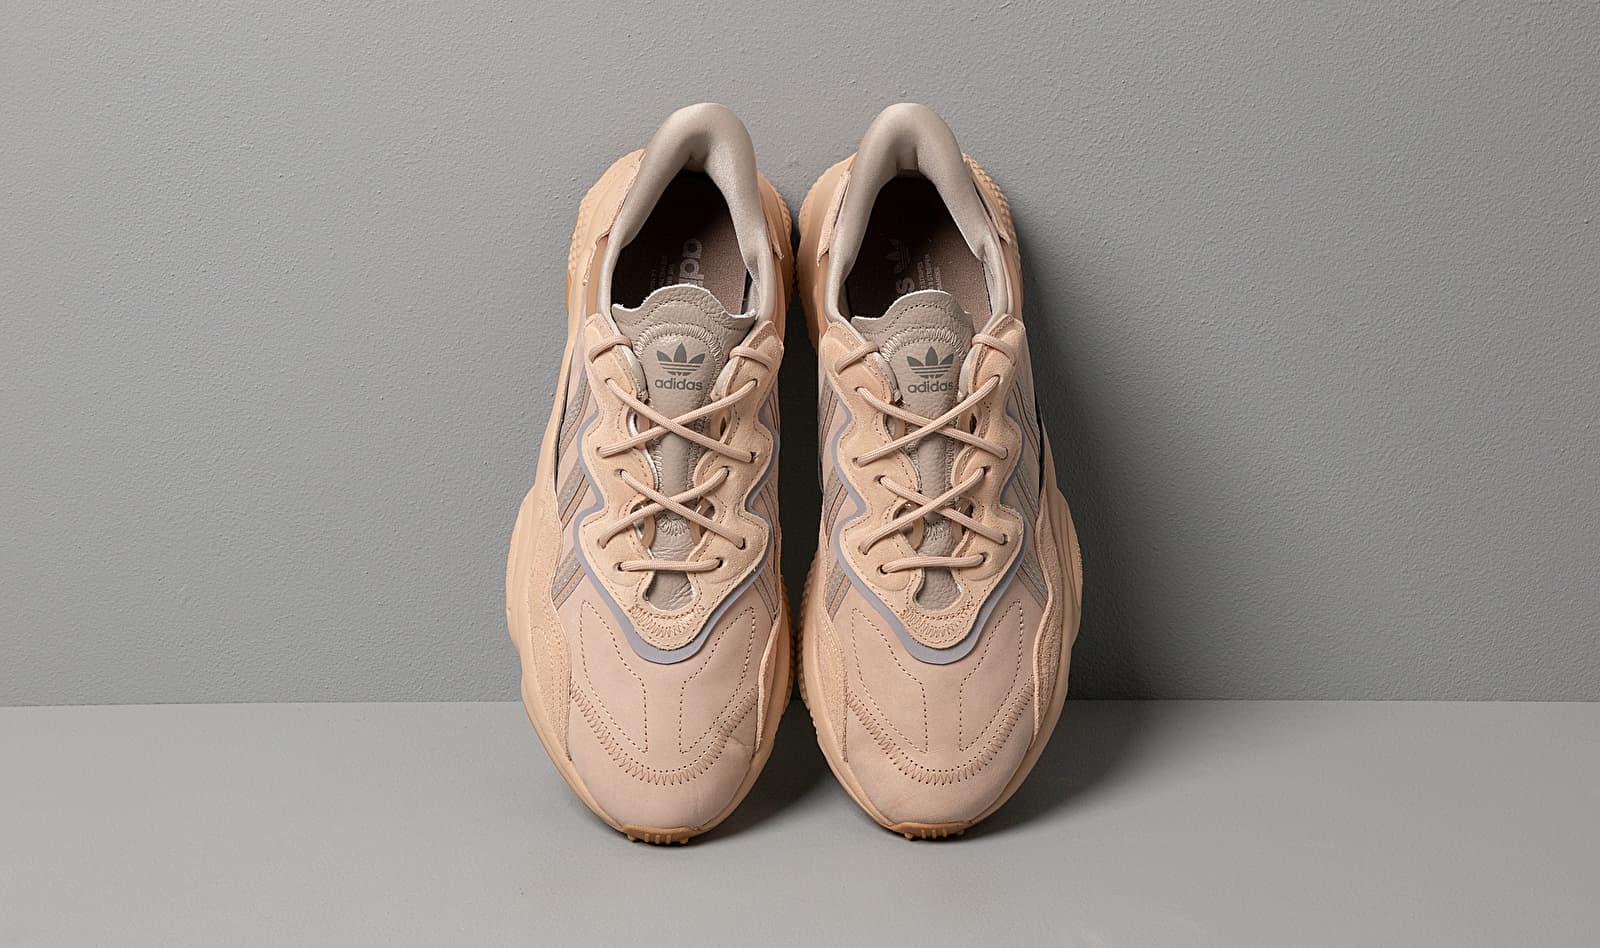 Adidas Ozweego st pale nude/light brown/solar red ab 75,04 